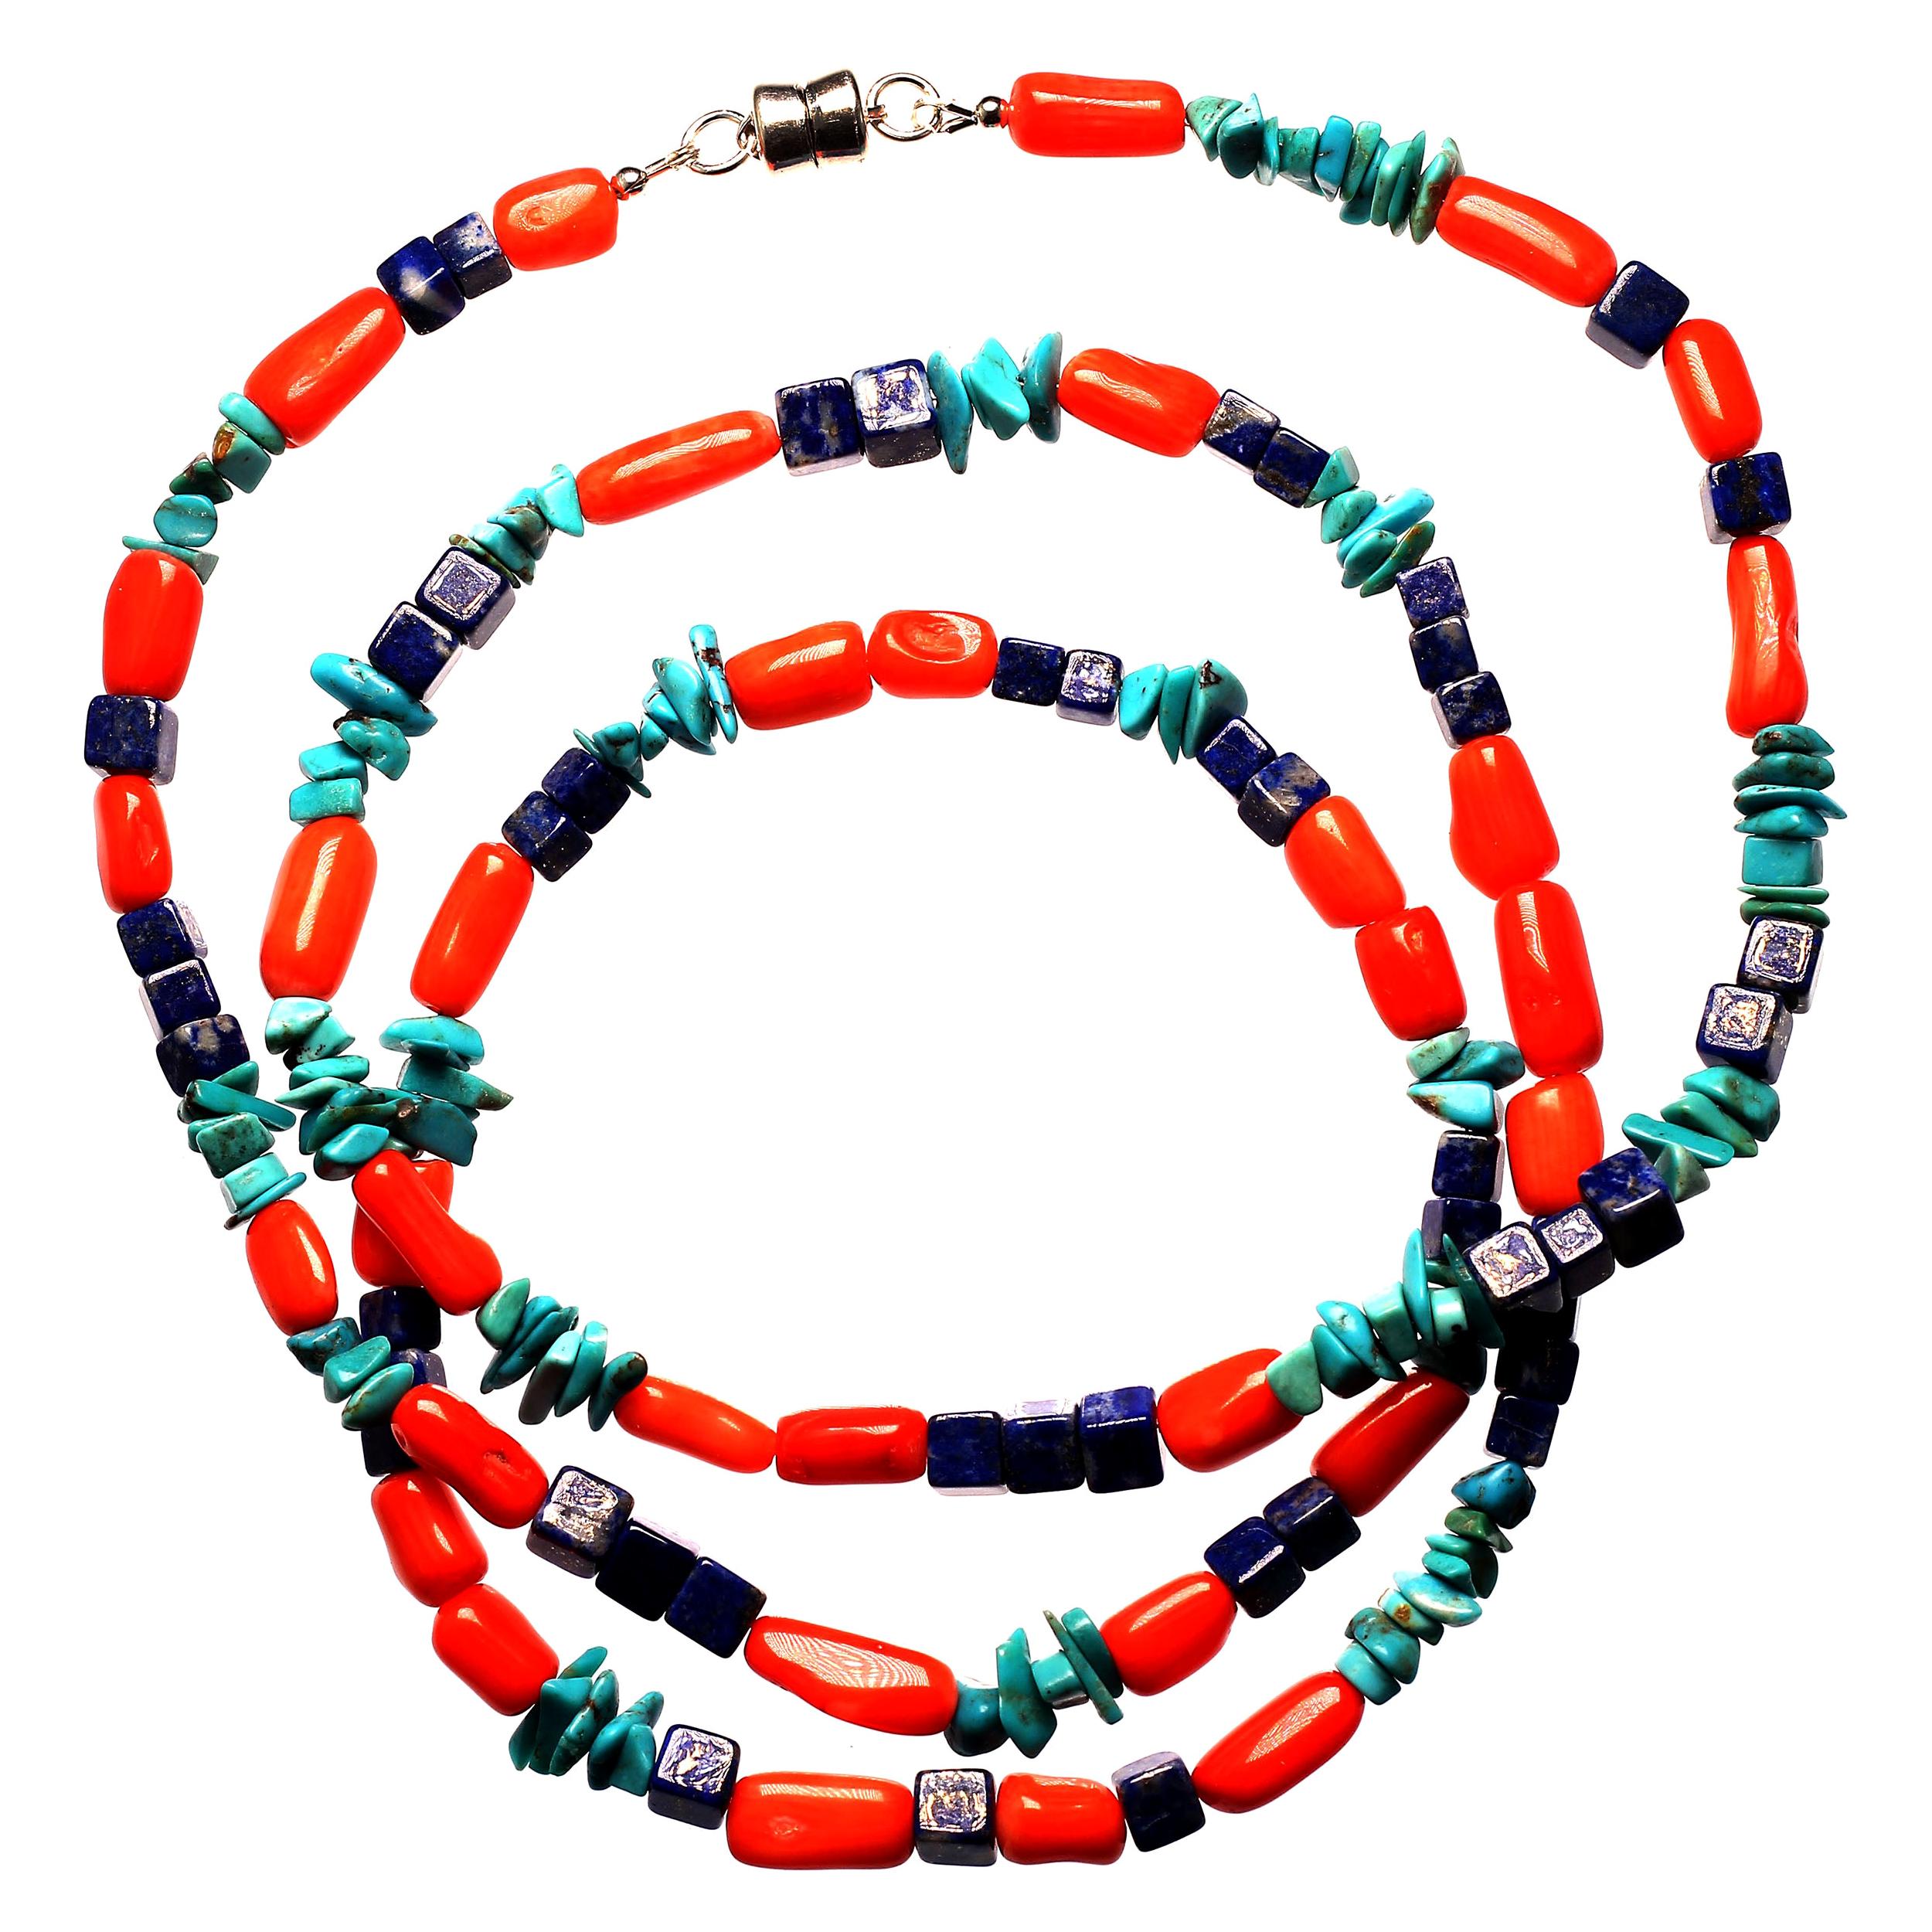 This is a great, colorful, lightweight necklace at 35 inches that can be worn long or doubled. It features tubes of bright bamboo Coral, squares of Lapis Lazuli, and chips of Turquoise.  All these are highly polished and randomly arranged.  This